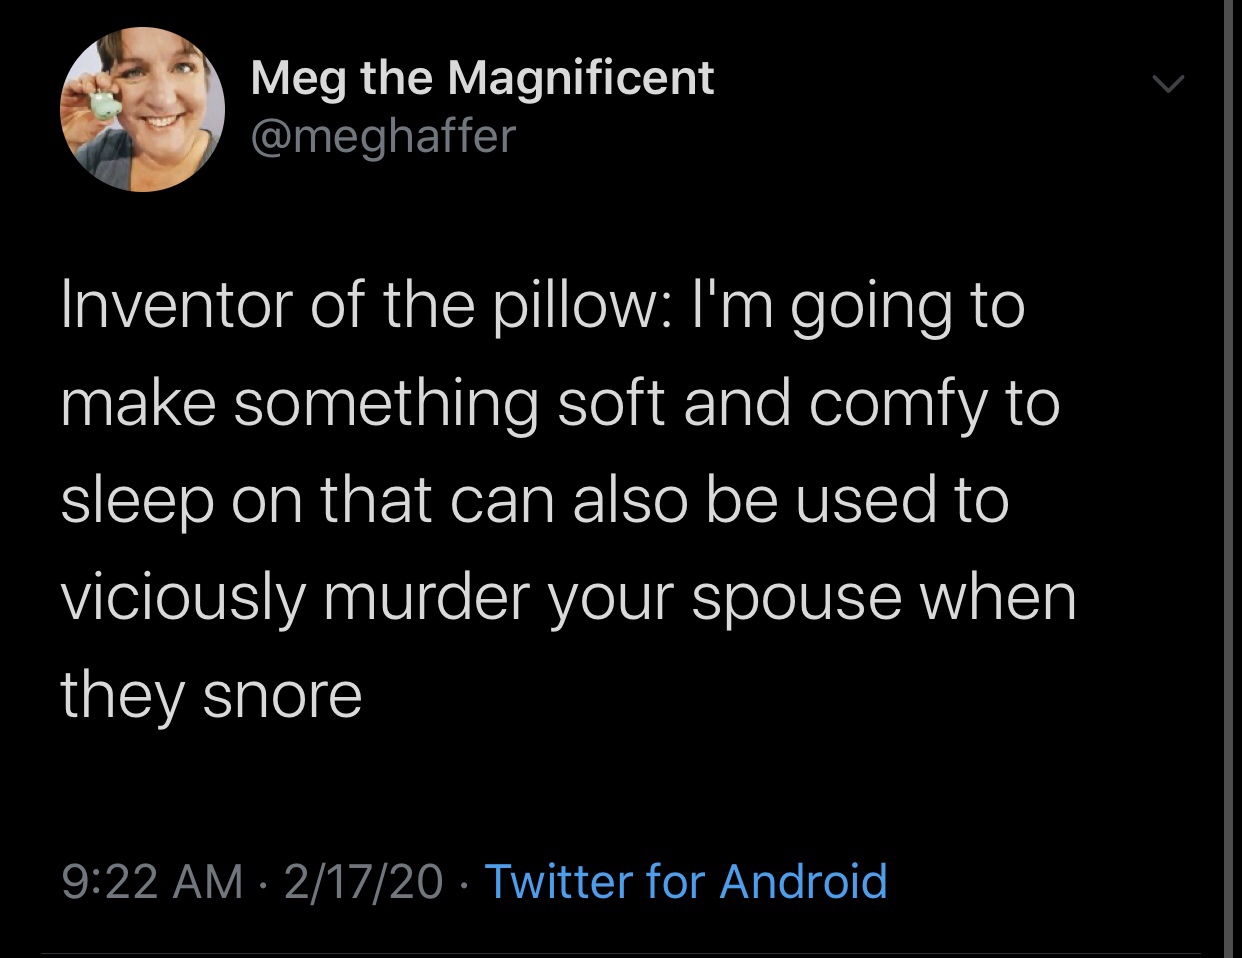 atmosphere - Meg the Magnificent Inventor of the pillow I'm going to make something soft and comfy to sleep on that can also be used to viciously murder your spouse when they snore 21720 Twitter for Android